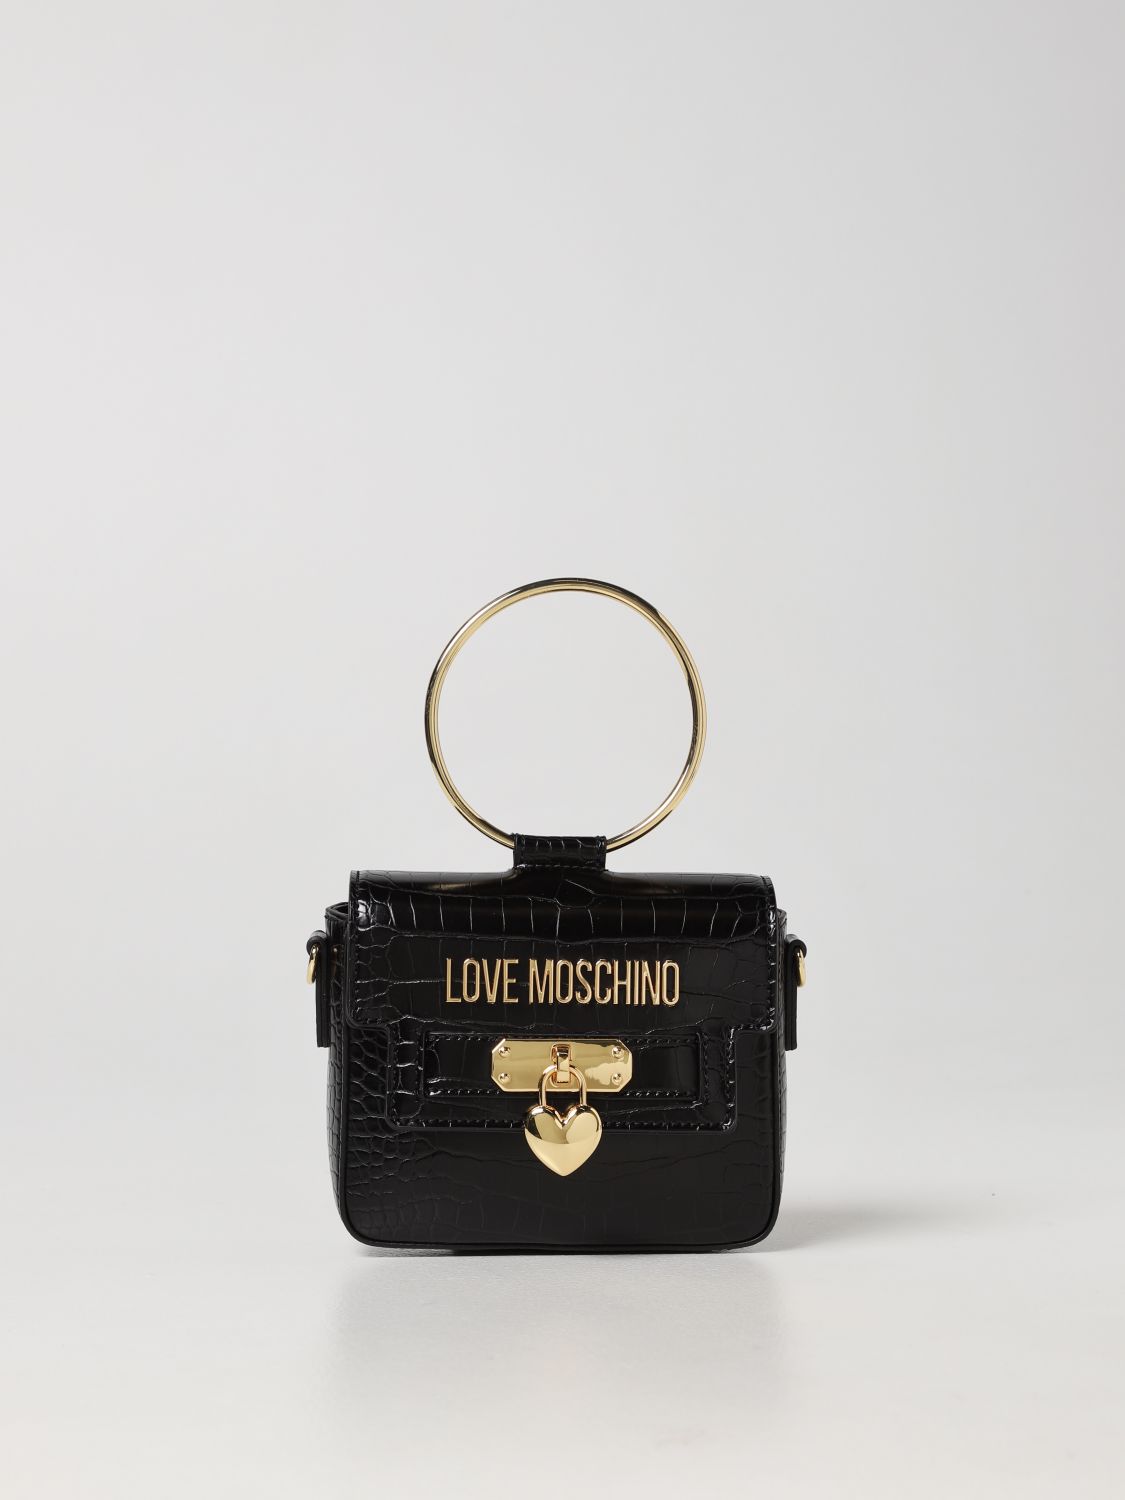 Love Moschino bag in synthetic leather with crocodile print